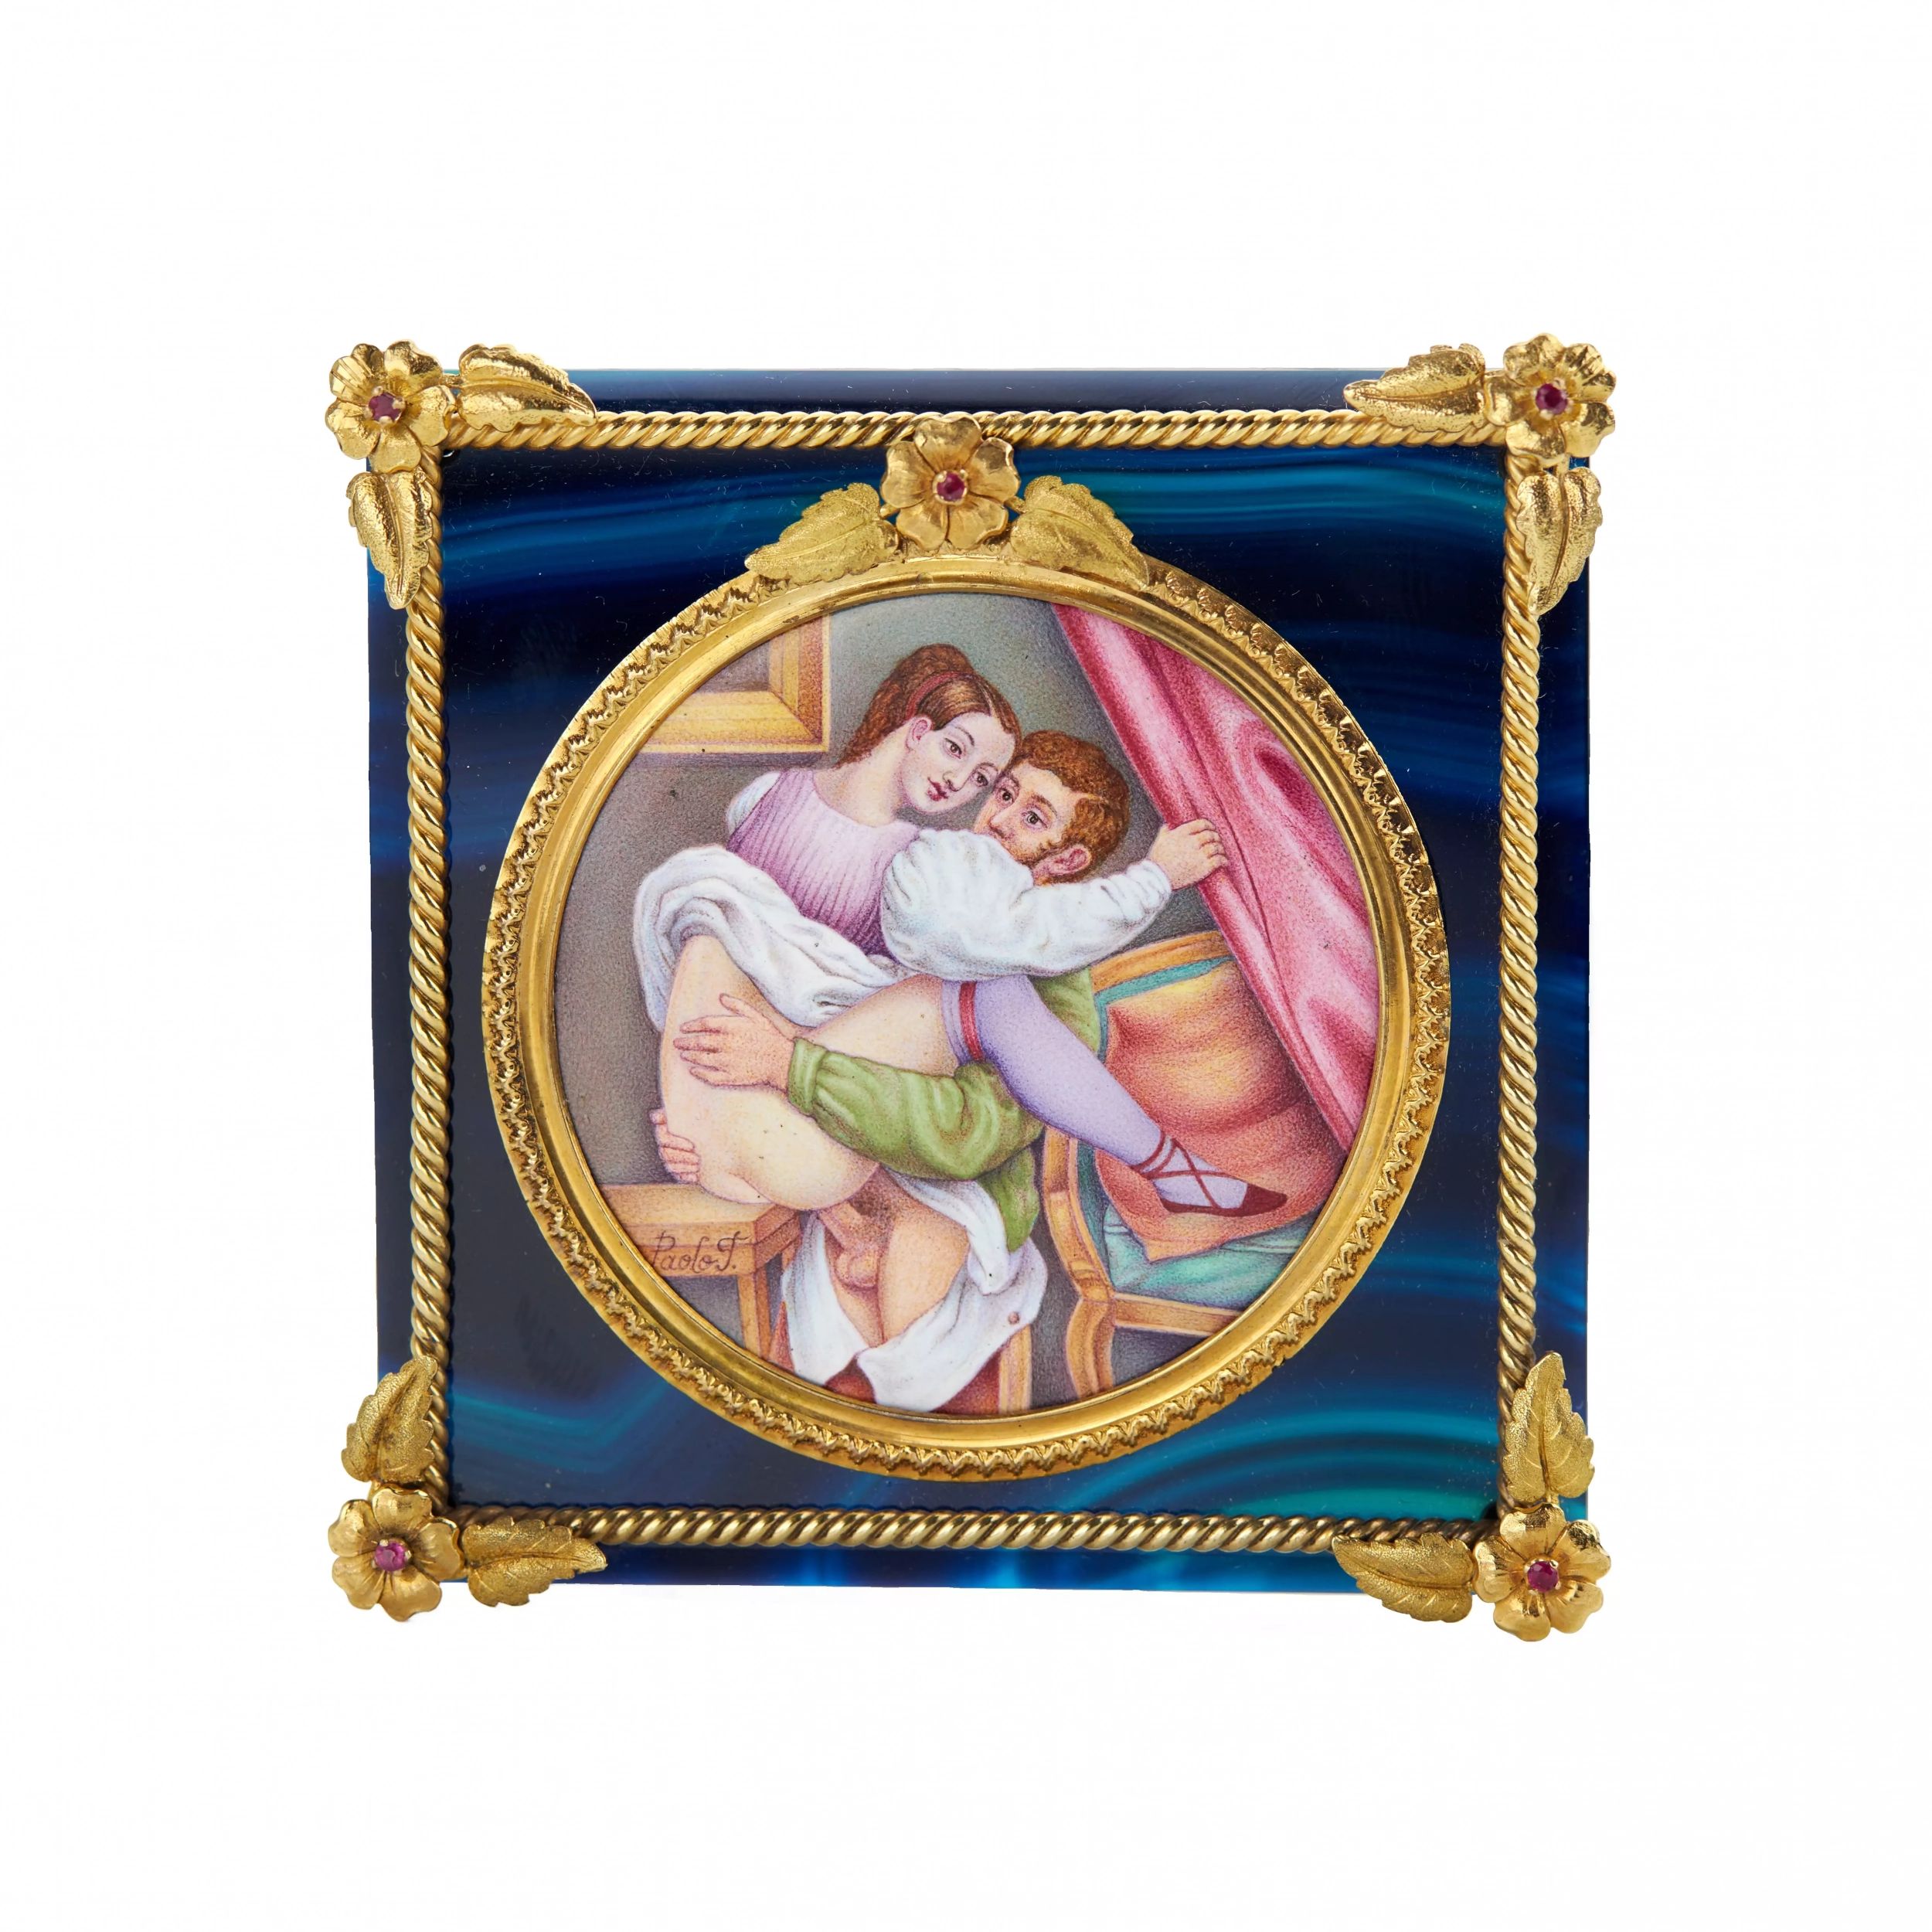 Erotic-enamel-miniature-in-a-gold-frame-on-a-tinted-agate-plate-19th-century-